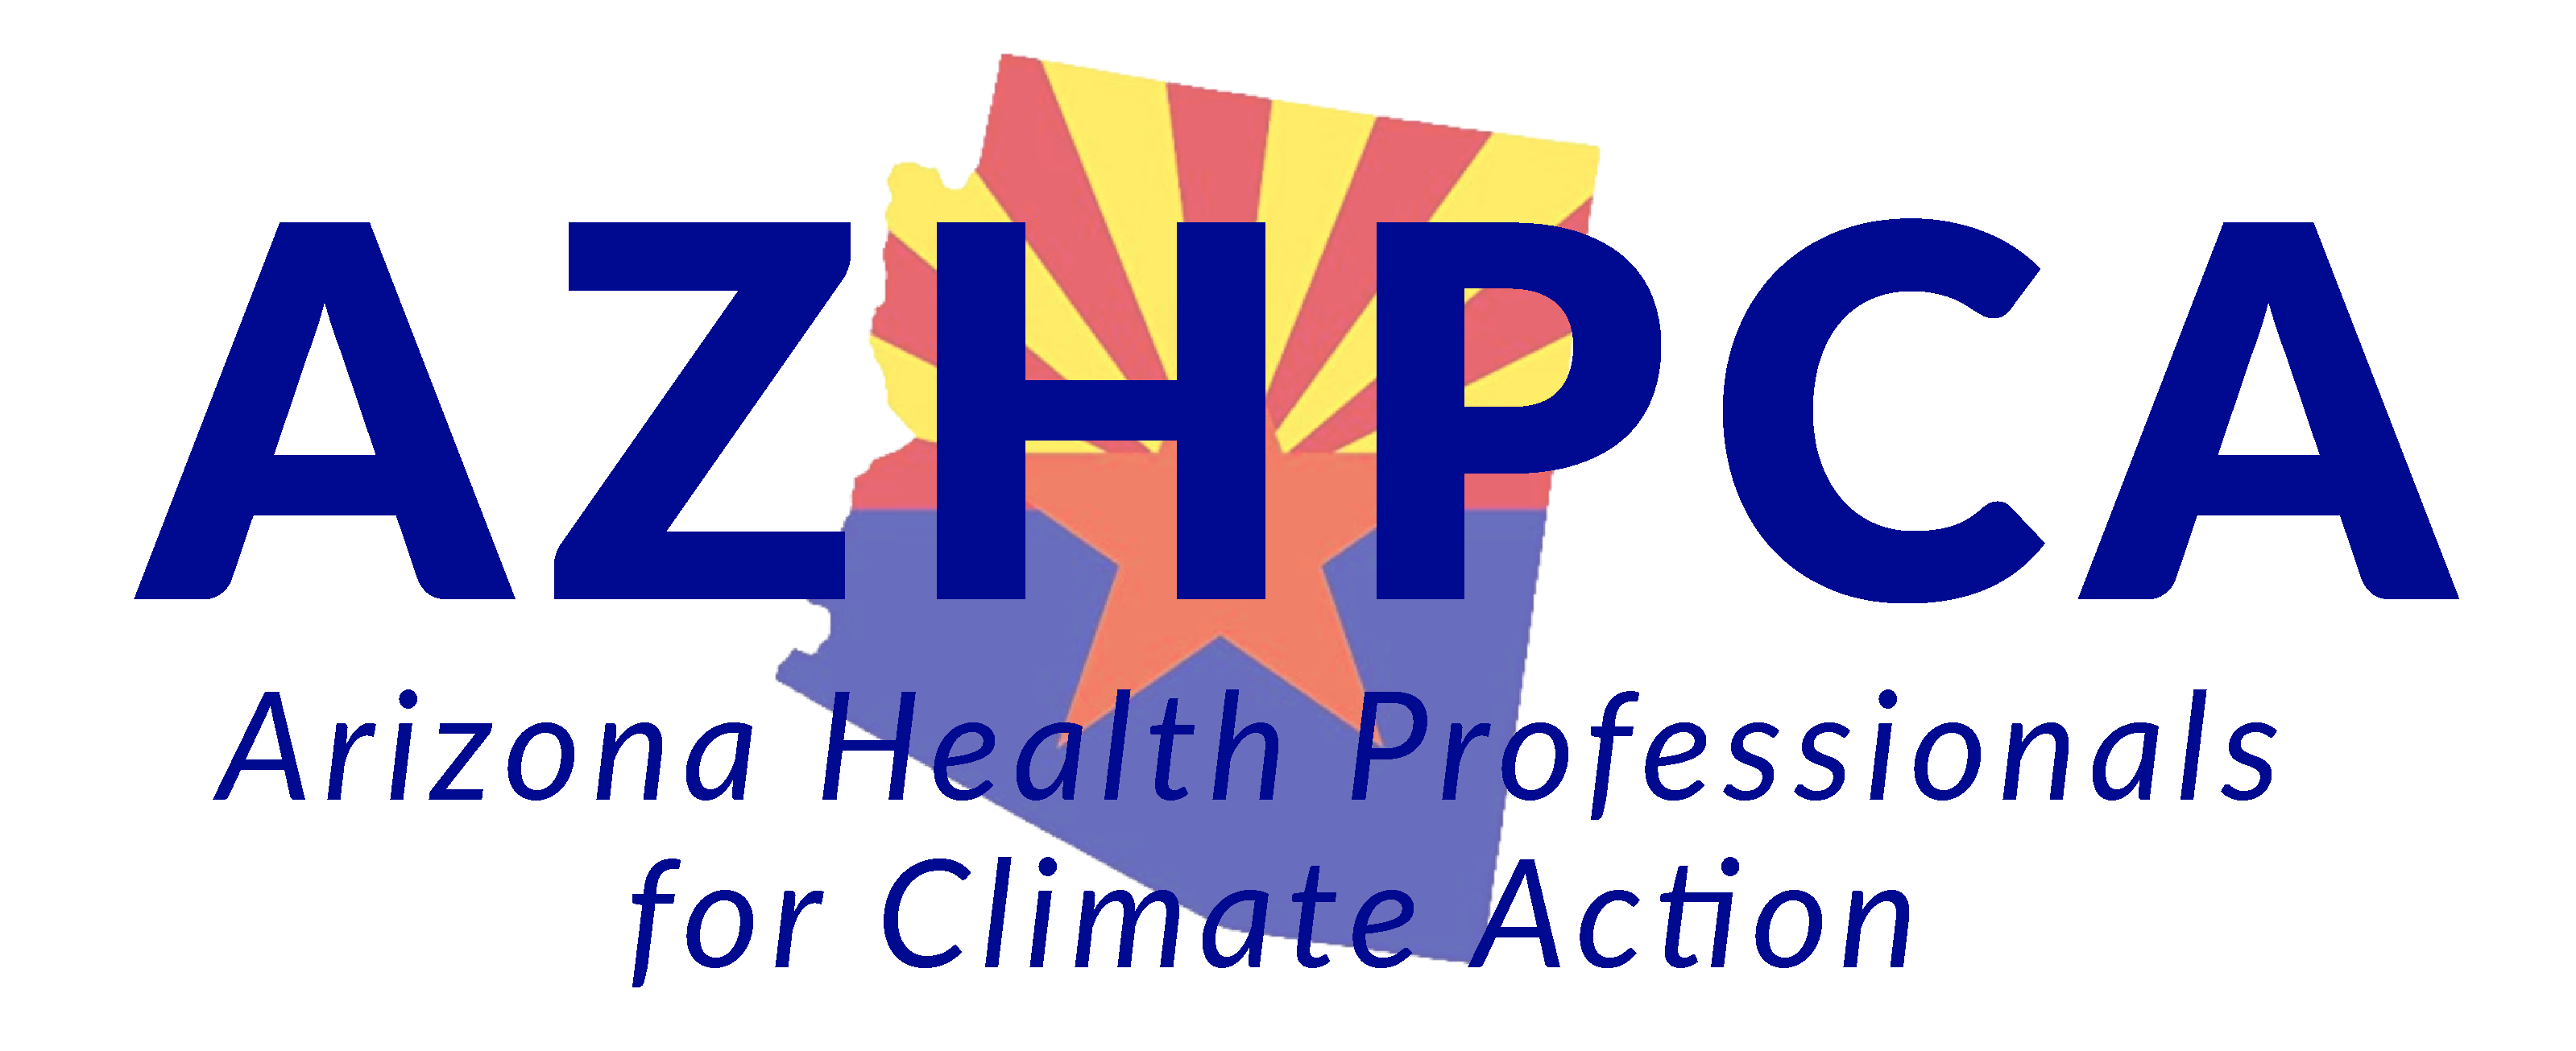 Arizona Health Professionals for Climate Action